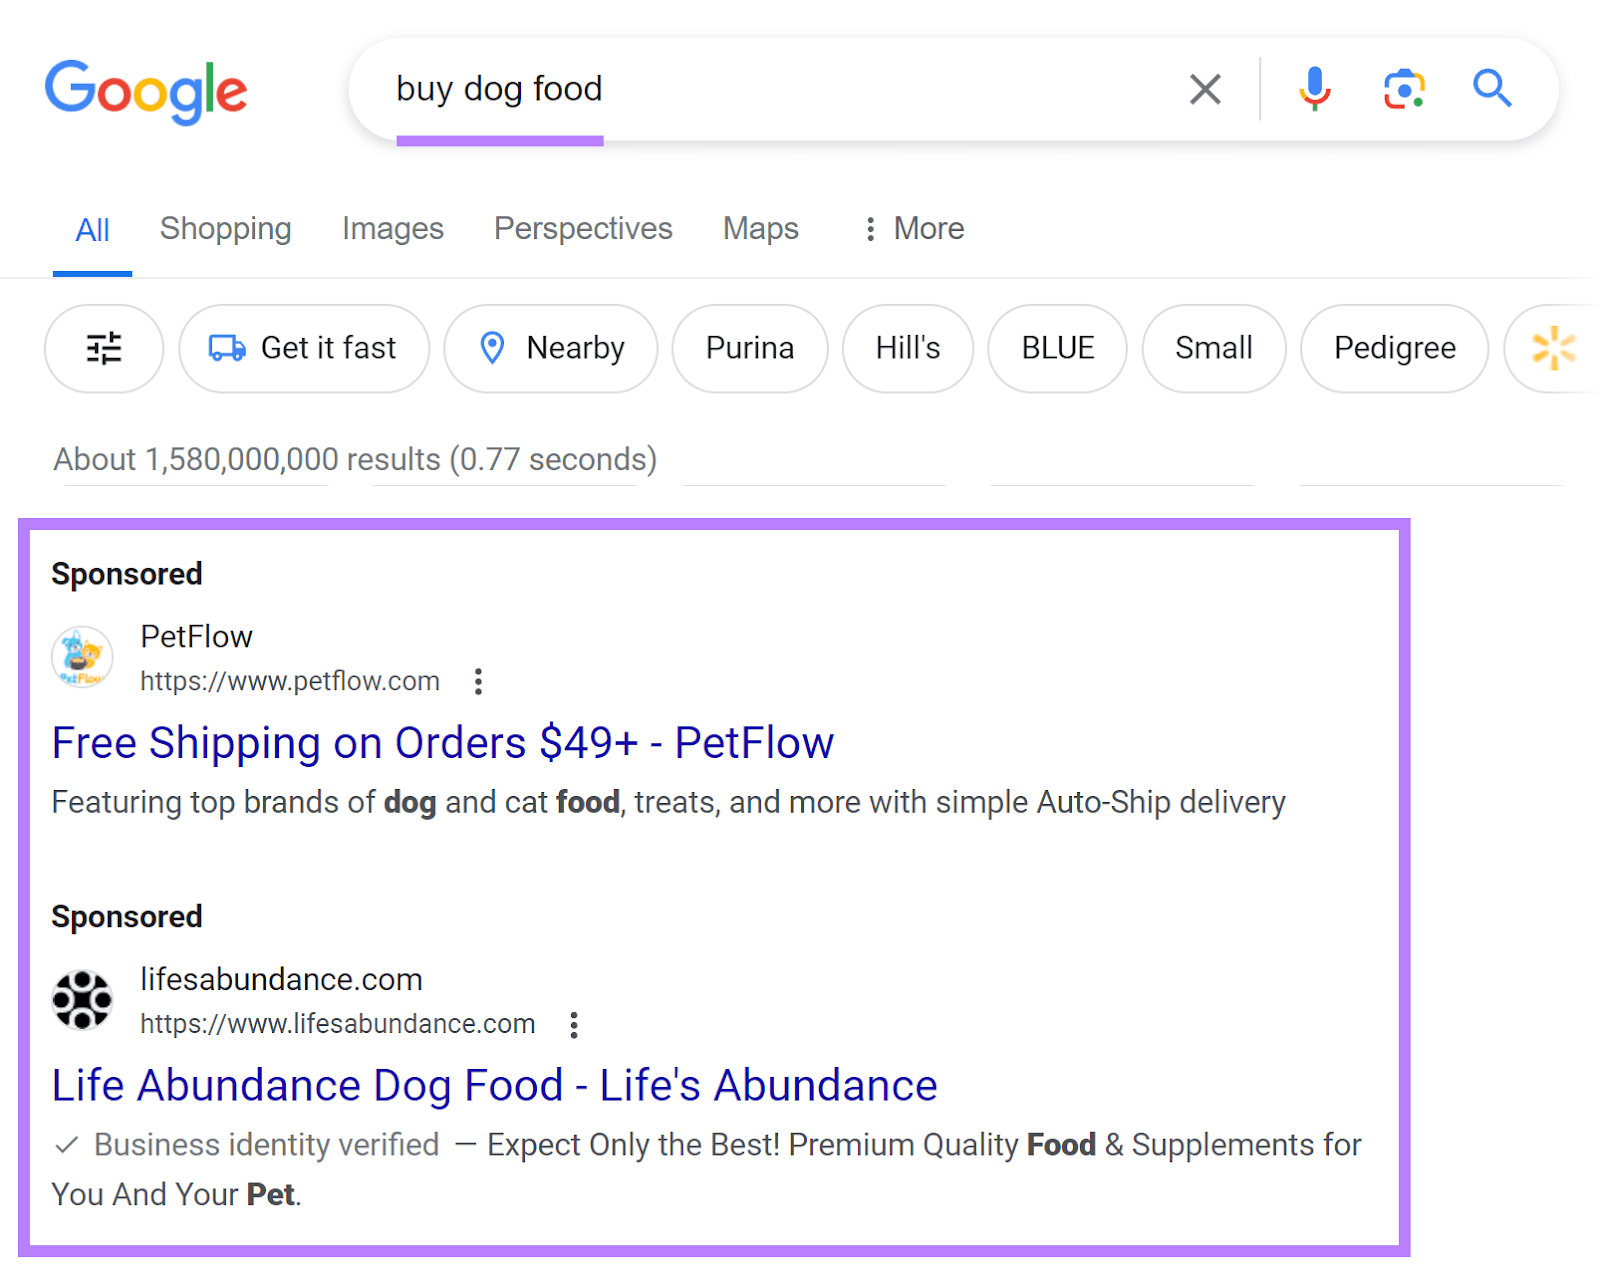 Search ads appearing on Google for "buy  food" query